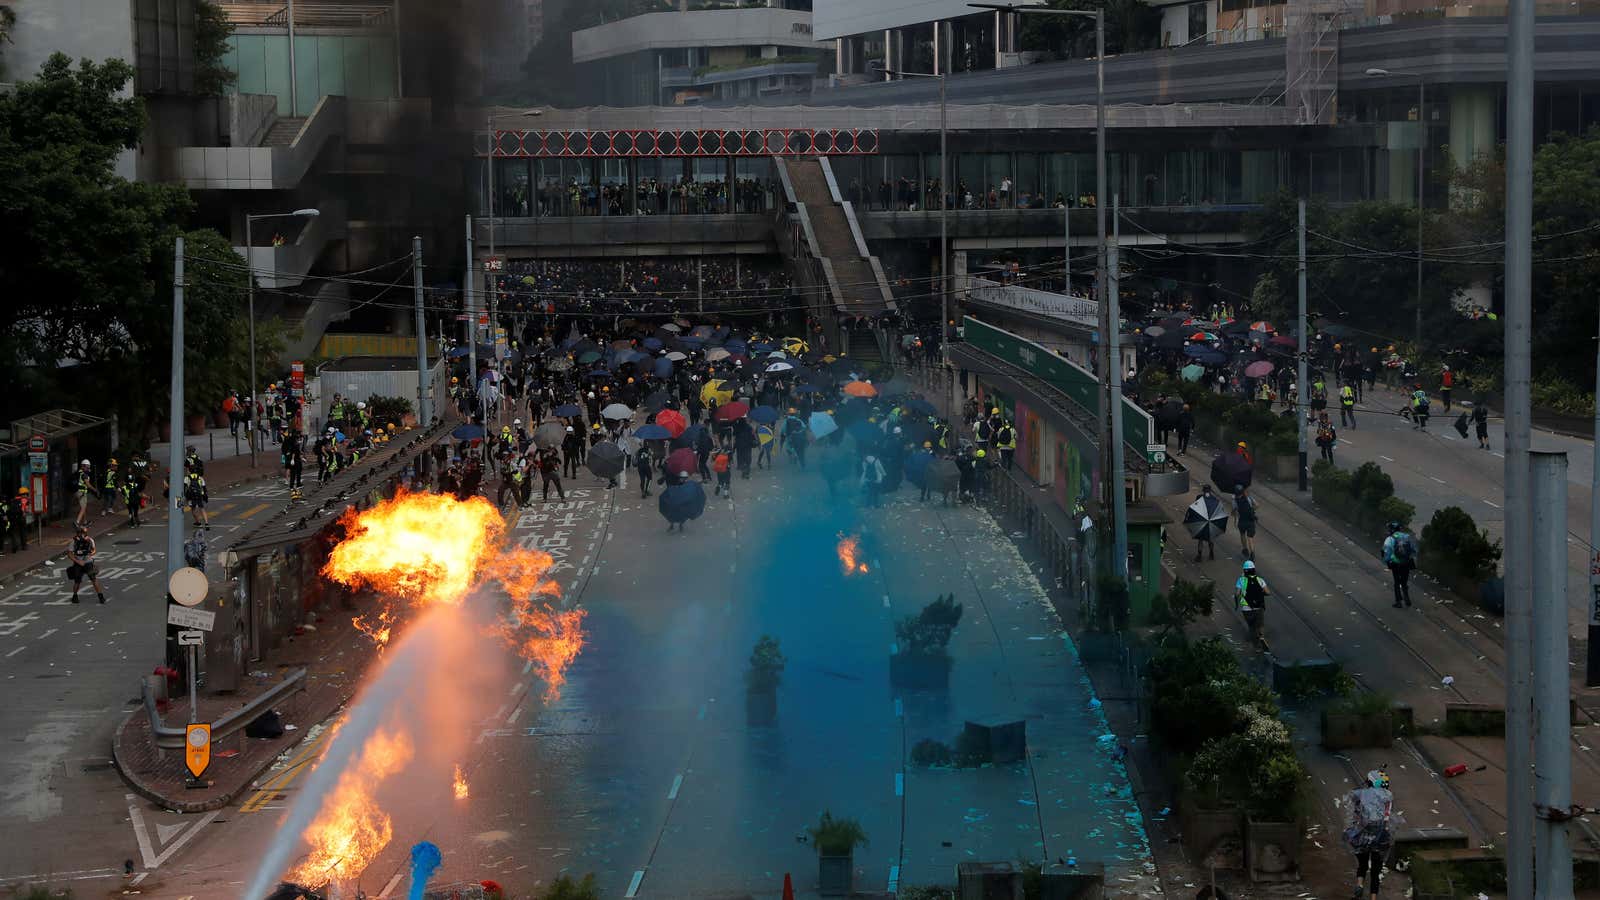 The scene in Hong Kong on China’s National Day.